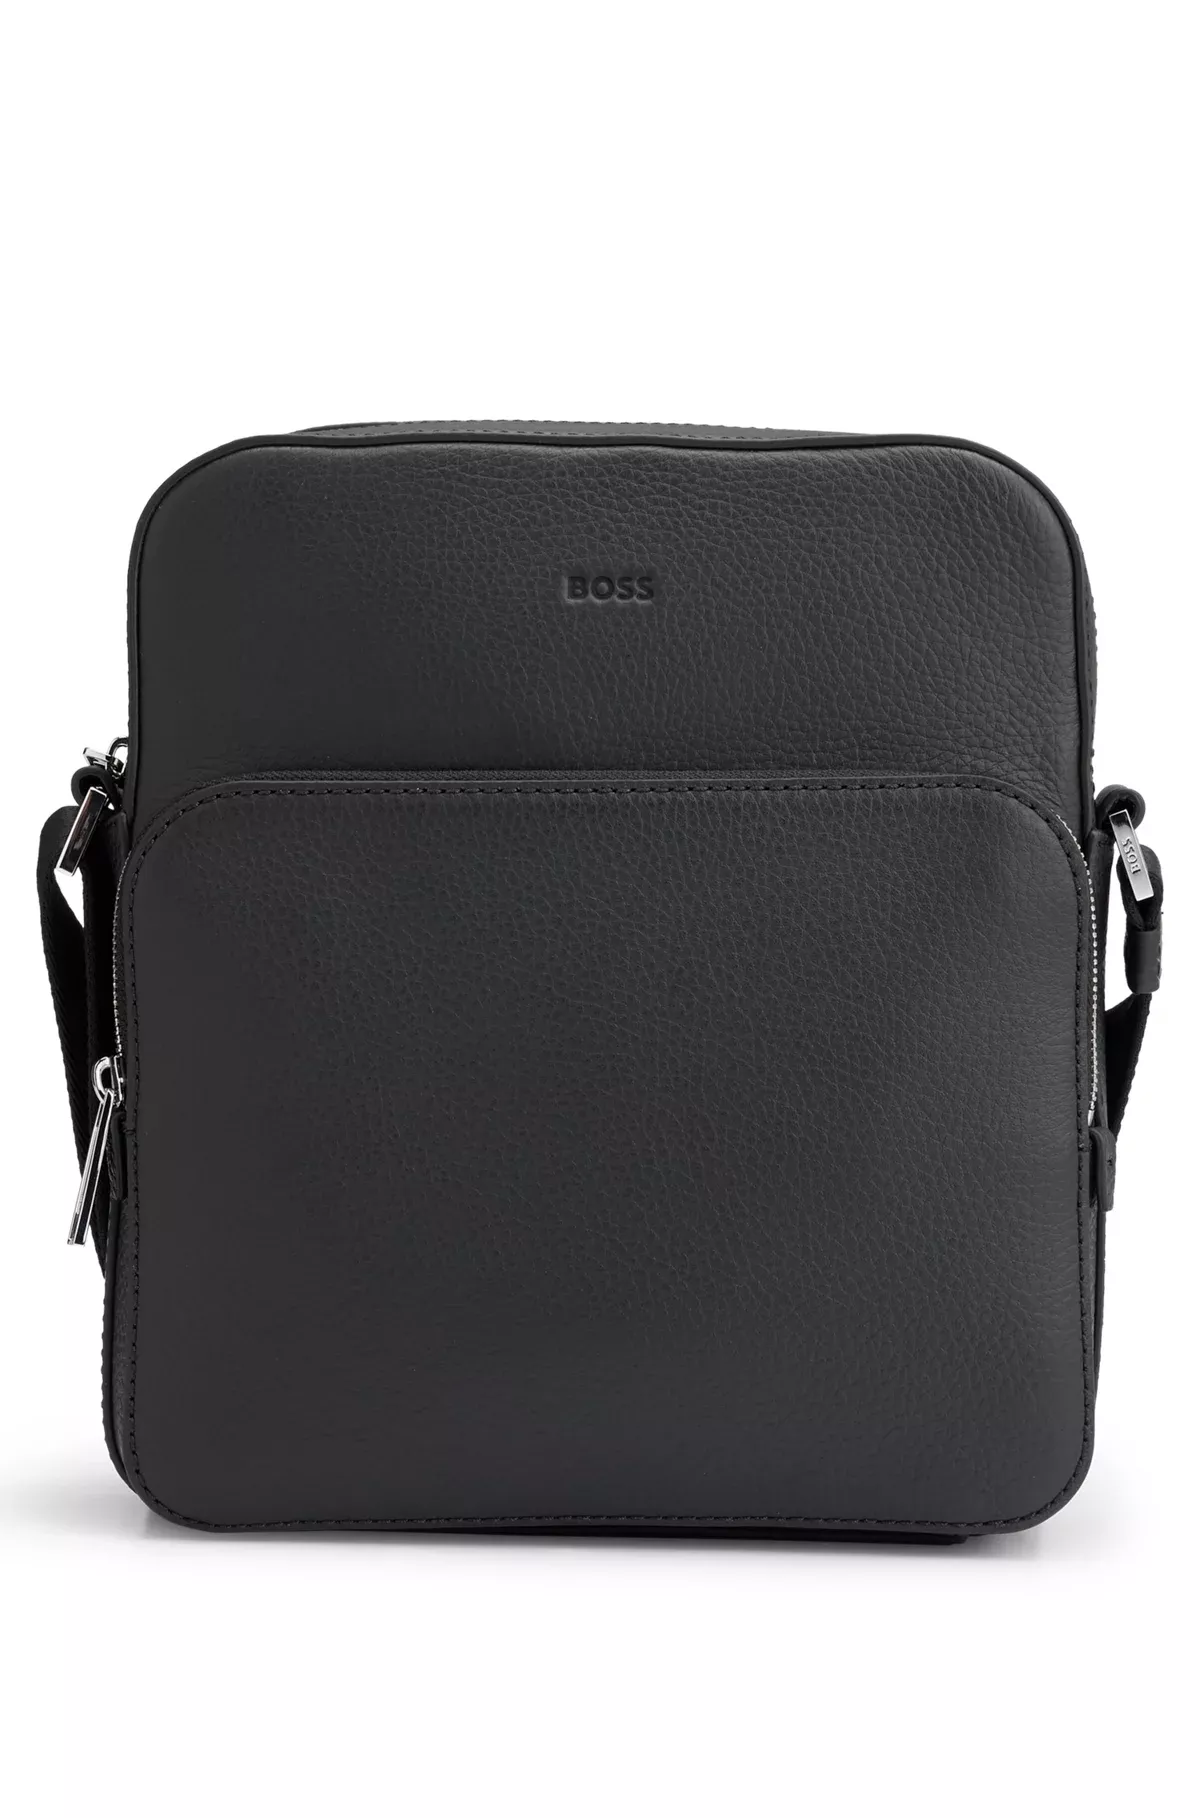 Boss Leather Reporter Bag with Embossed Logo, Black Night